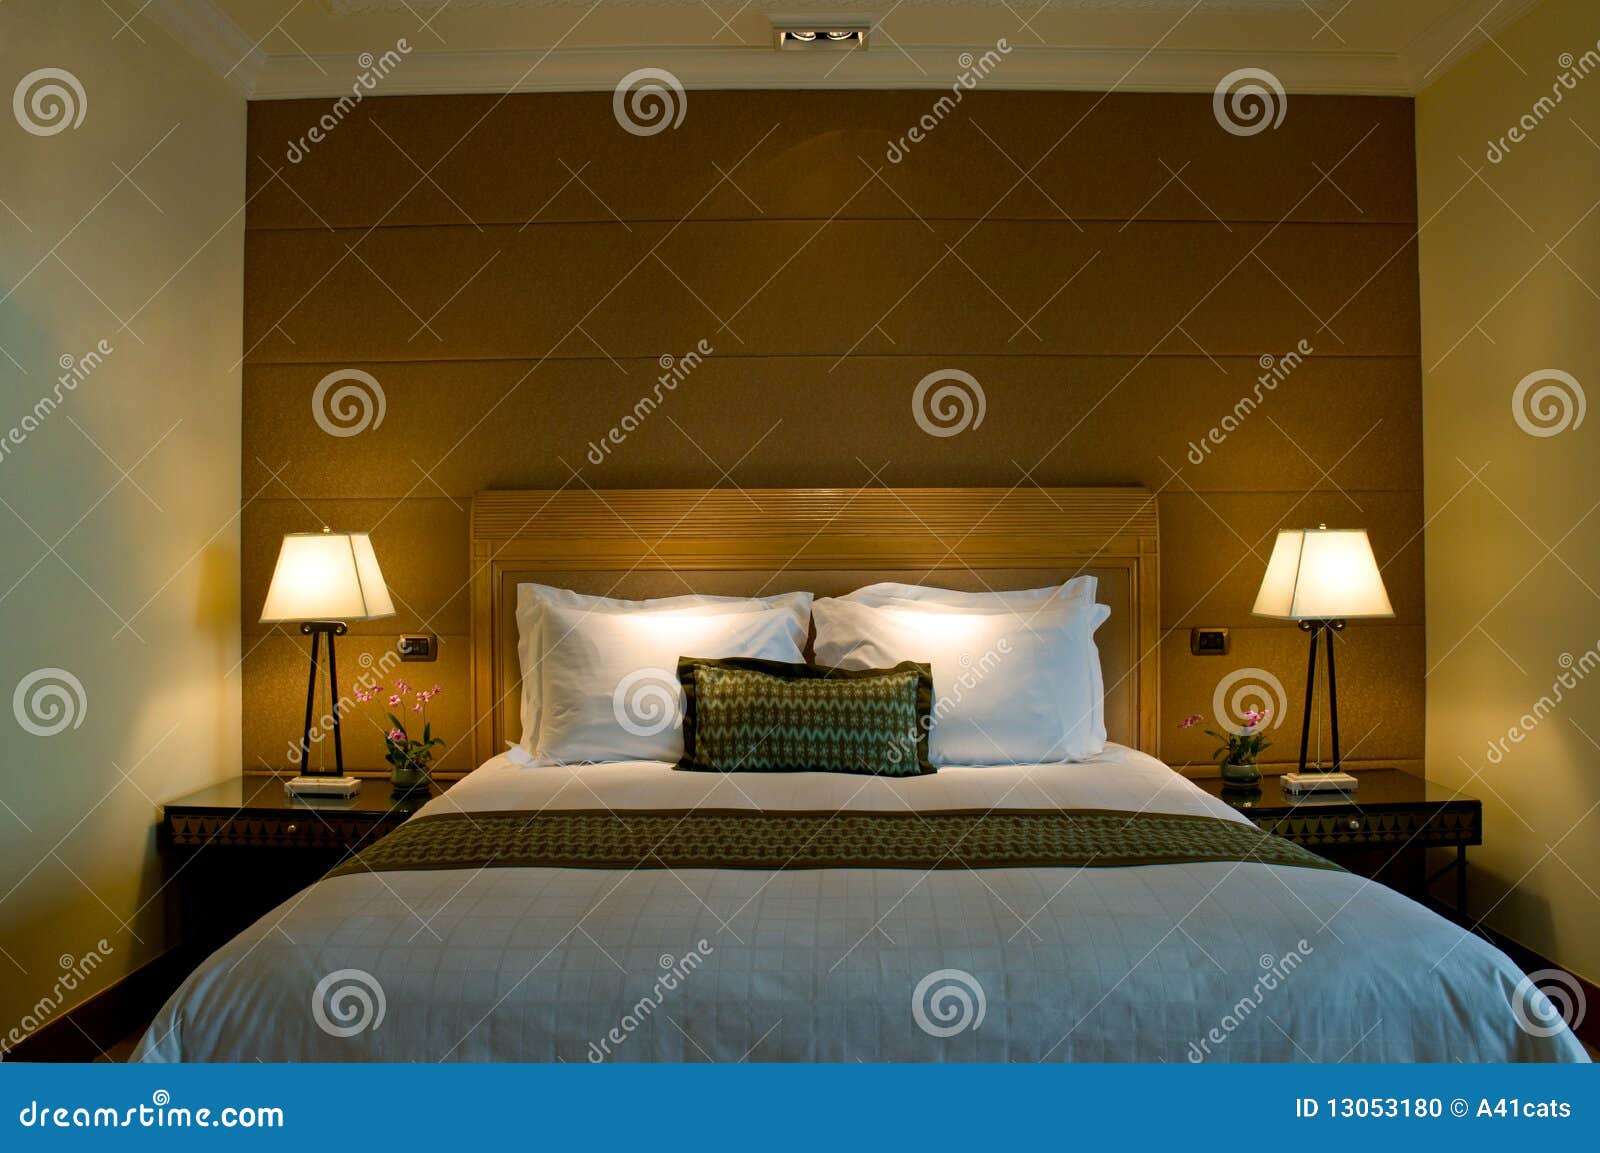 king size bed in a five star hotel suite room